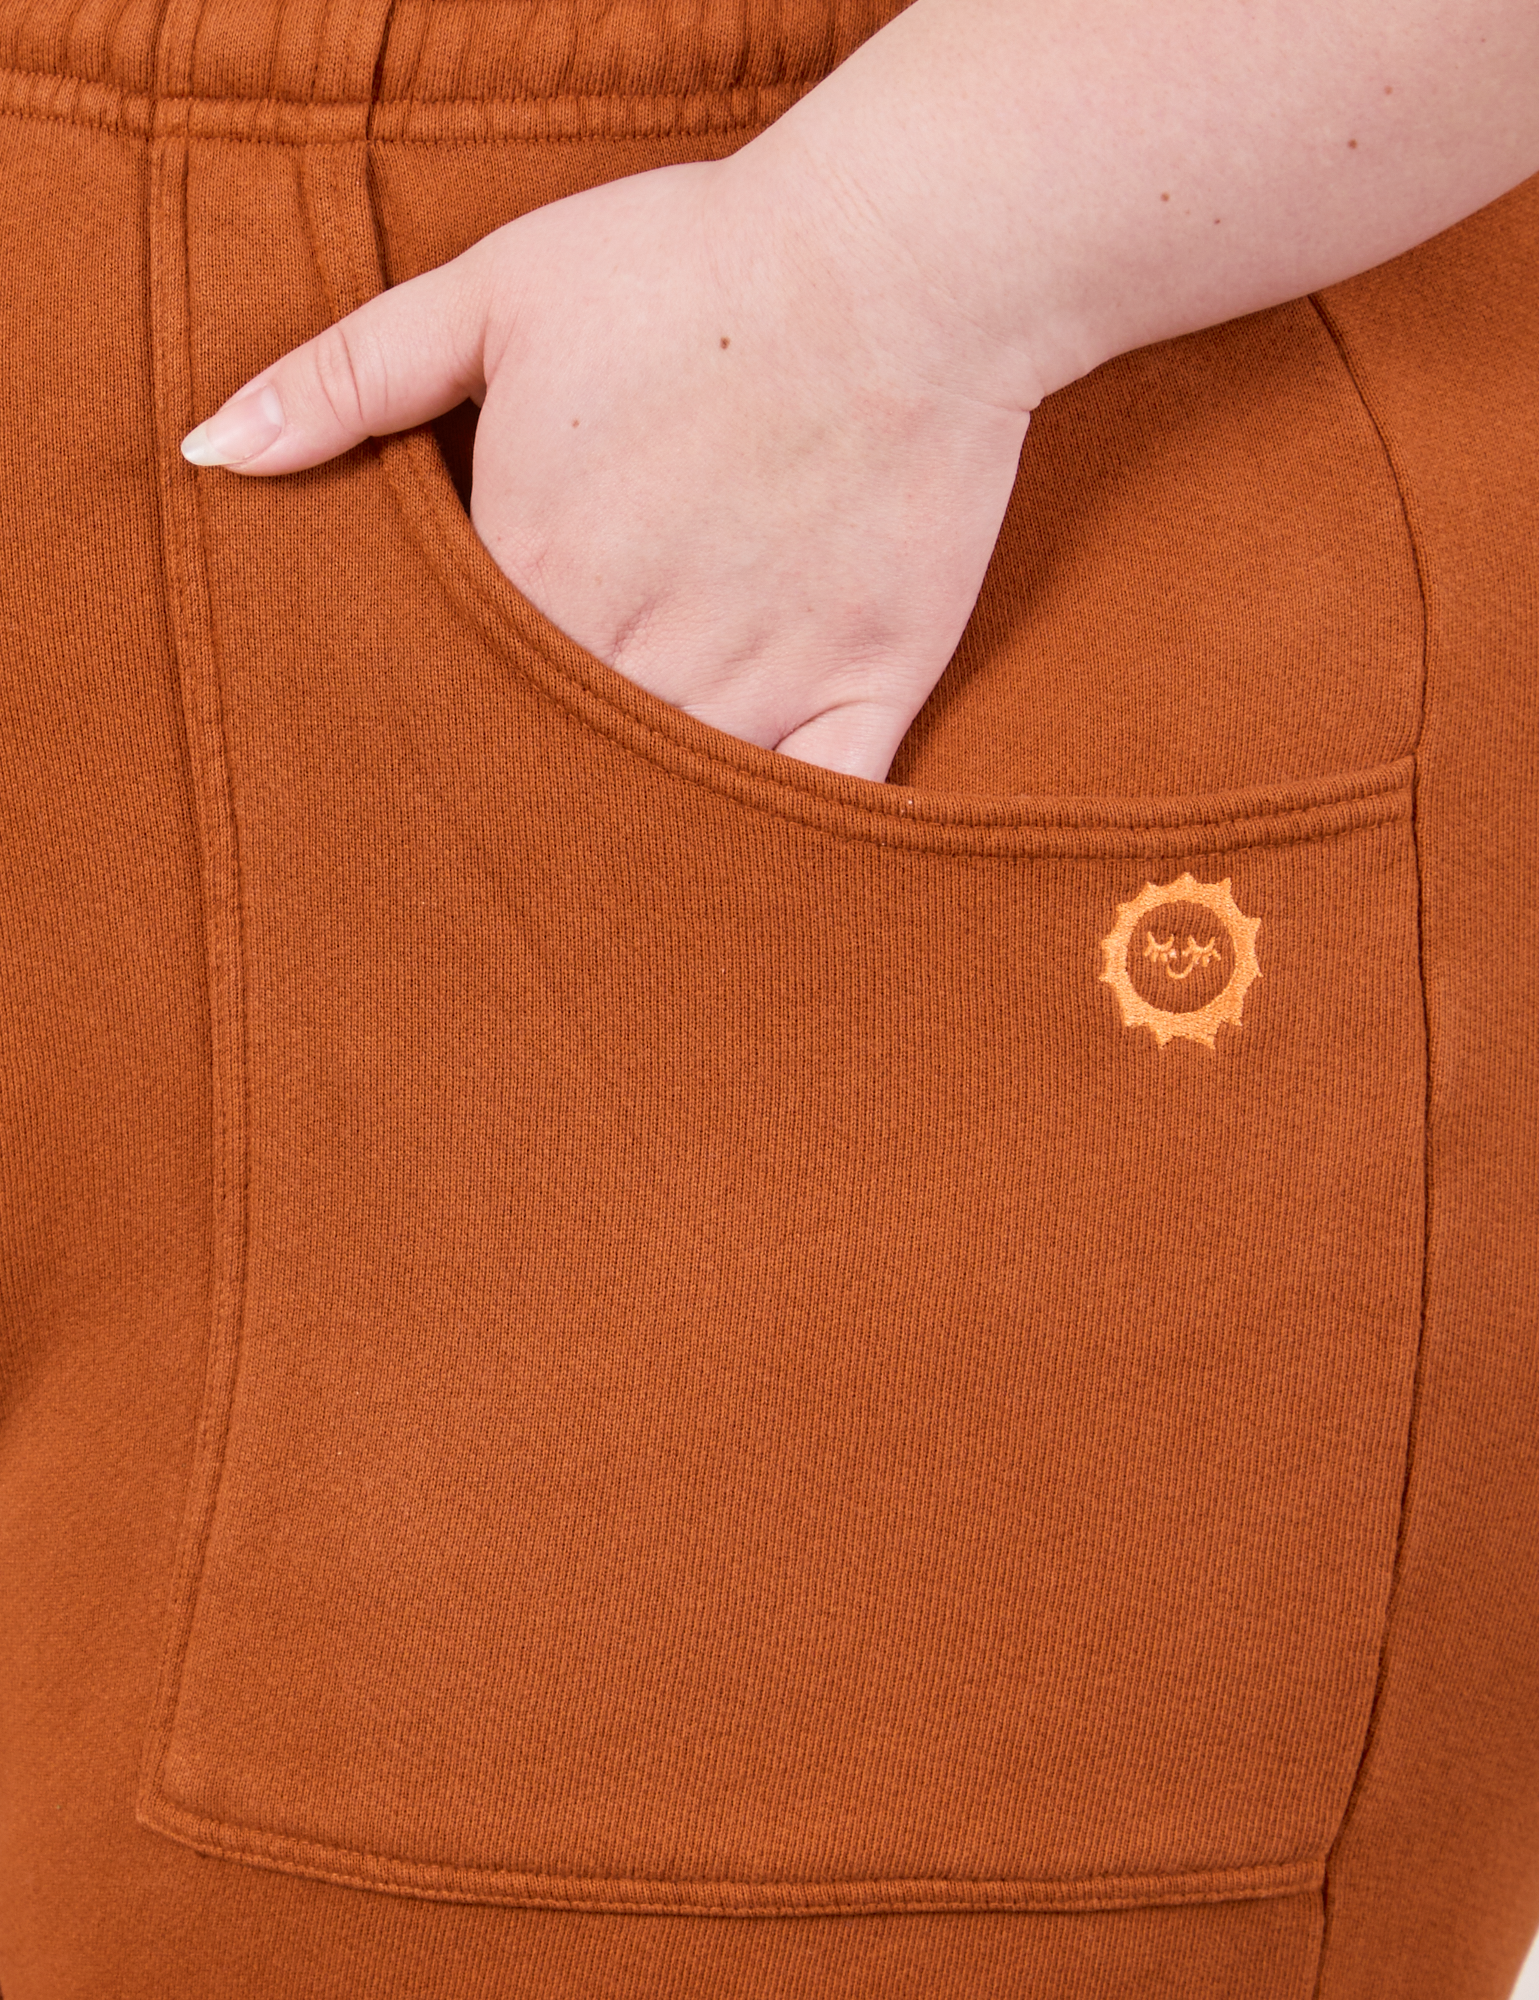 Cropped Rolled Cuff Sweatpants in Burnt Terracotta front pocket close up. Ashley has her hand in the pocket.